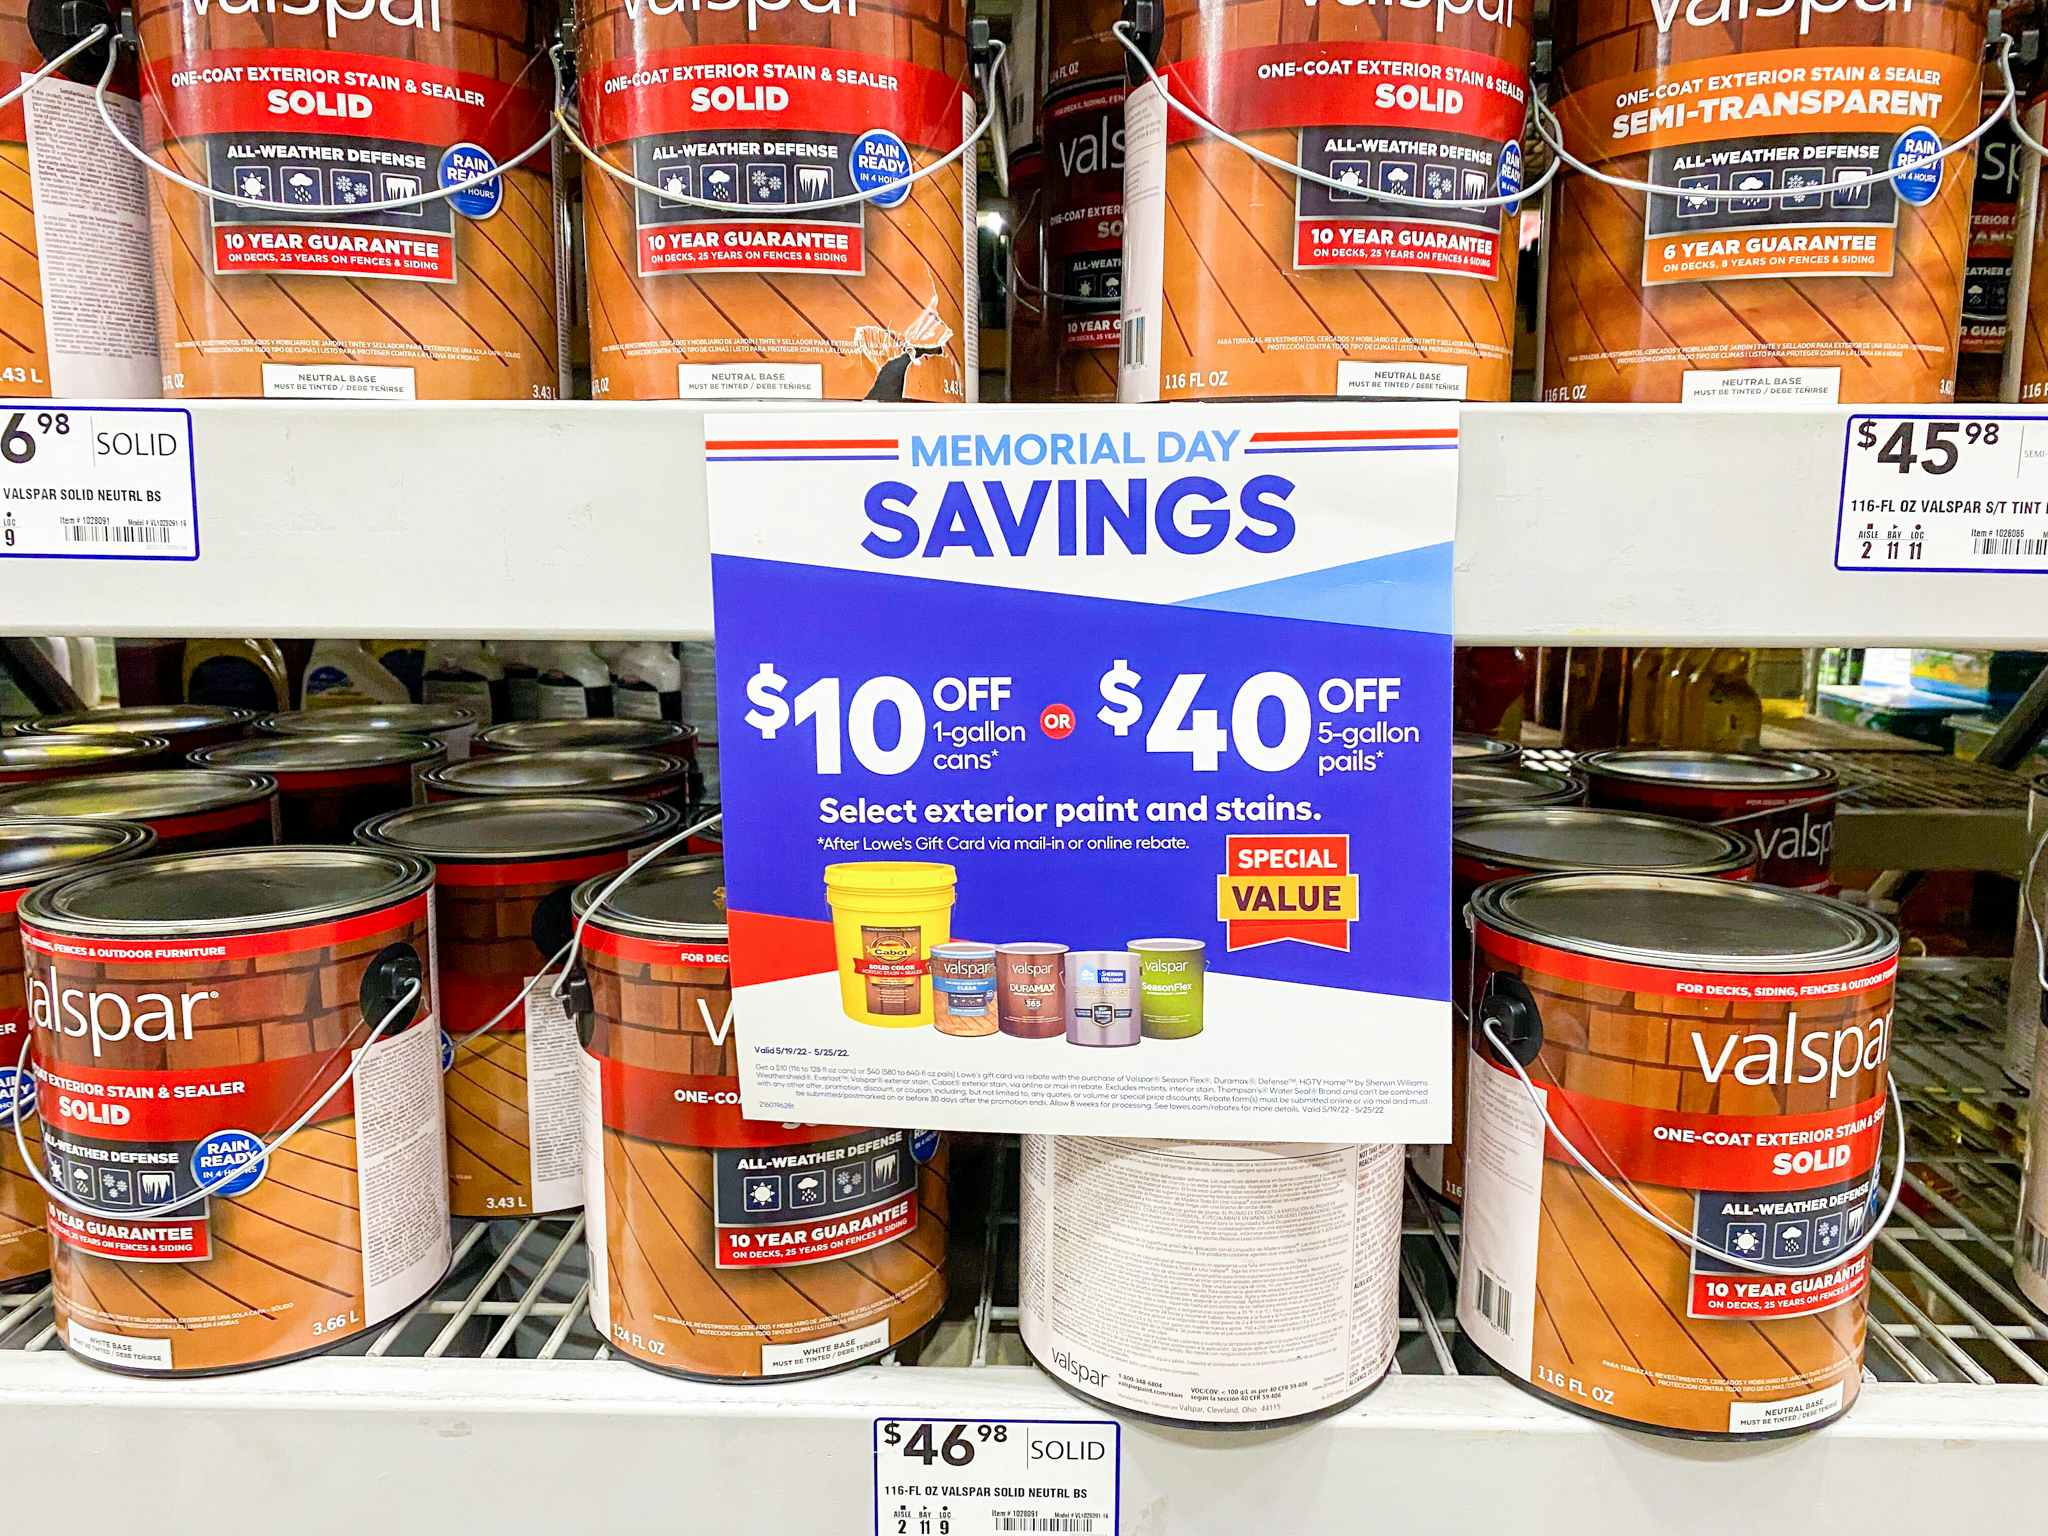 Memorial Day paint and stain savings sign at Lowe's